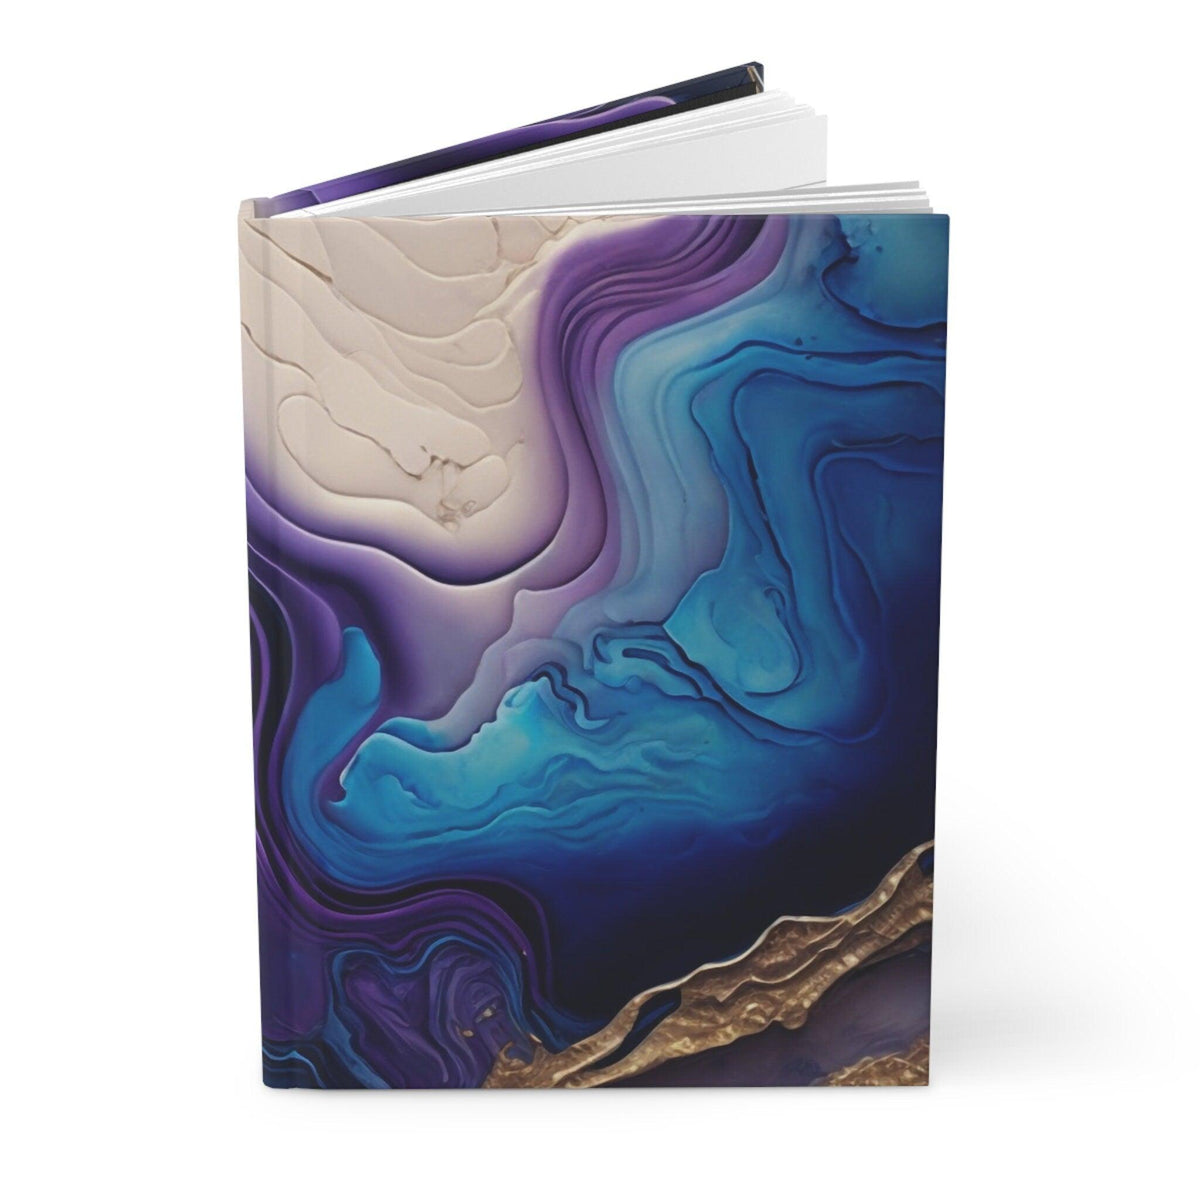 Custom Hardcover Journal Gift for Mom Gift for Graduate Custom Diary Notebook Lined Page Hardcover Diary for Artist Teacher Appreciation - The Ripple Effect Co.US